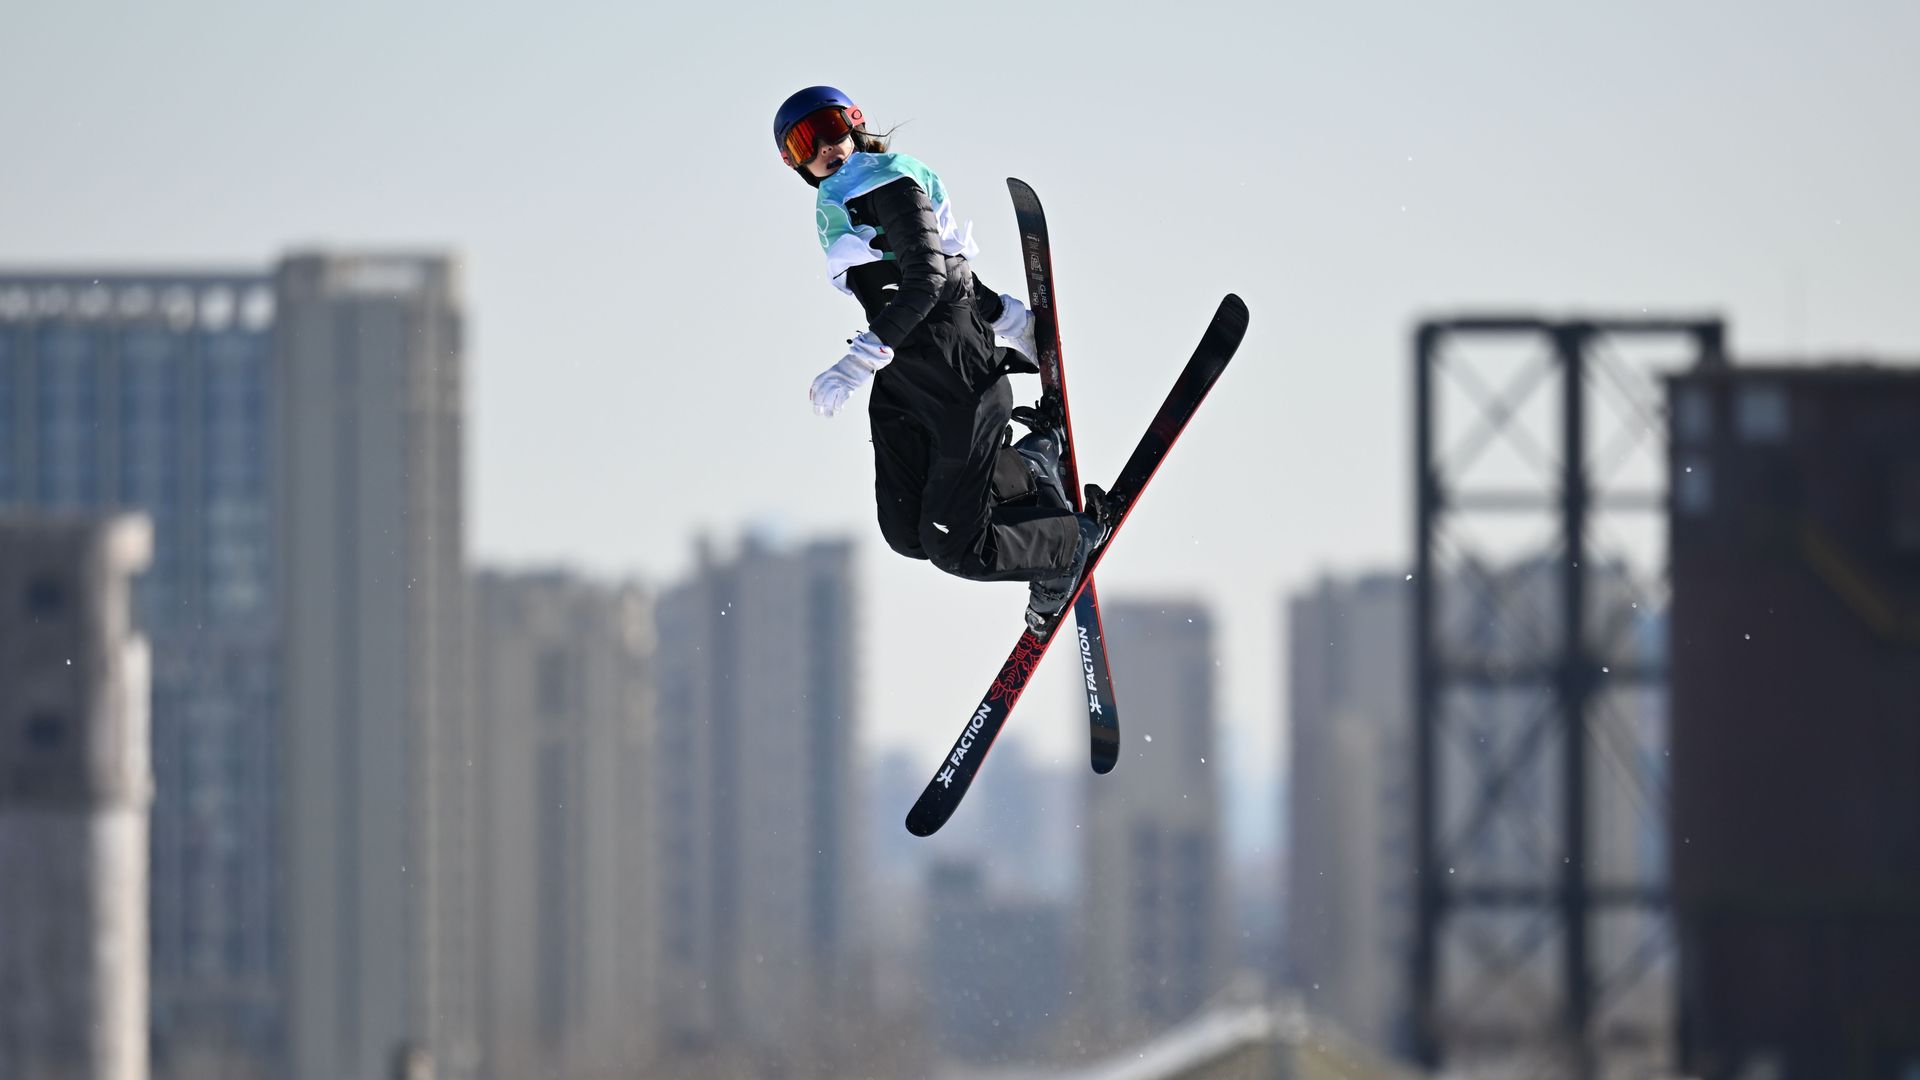 Eileen Gu jumps with Beijing highrises in the background